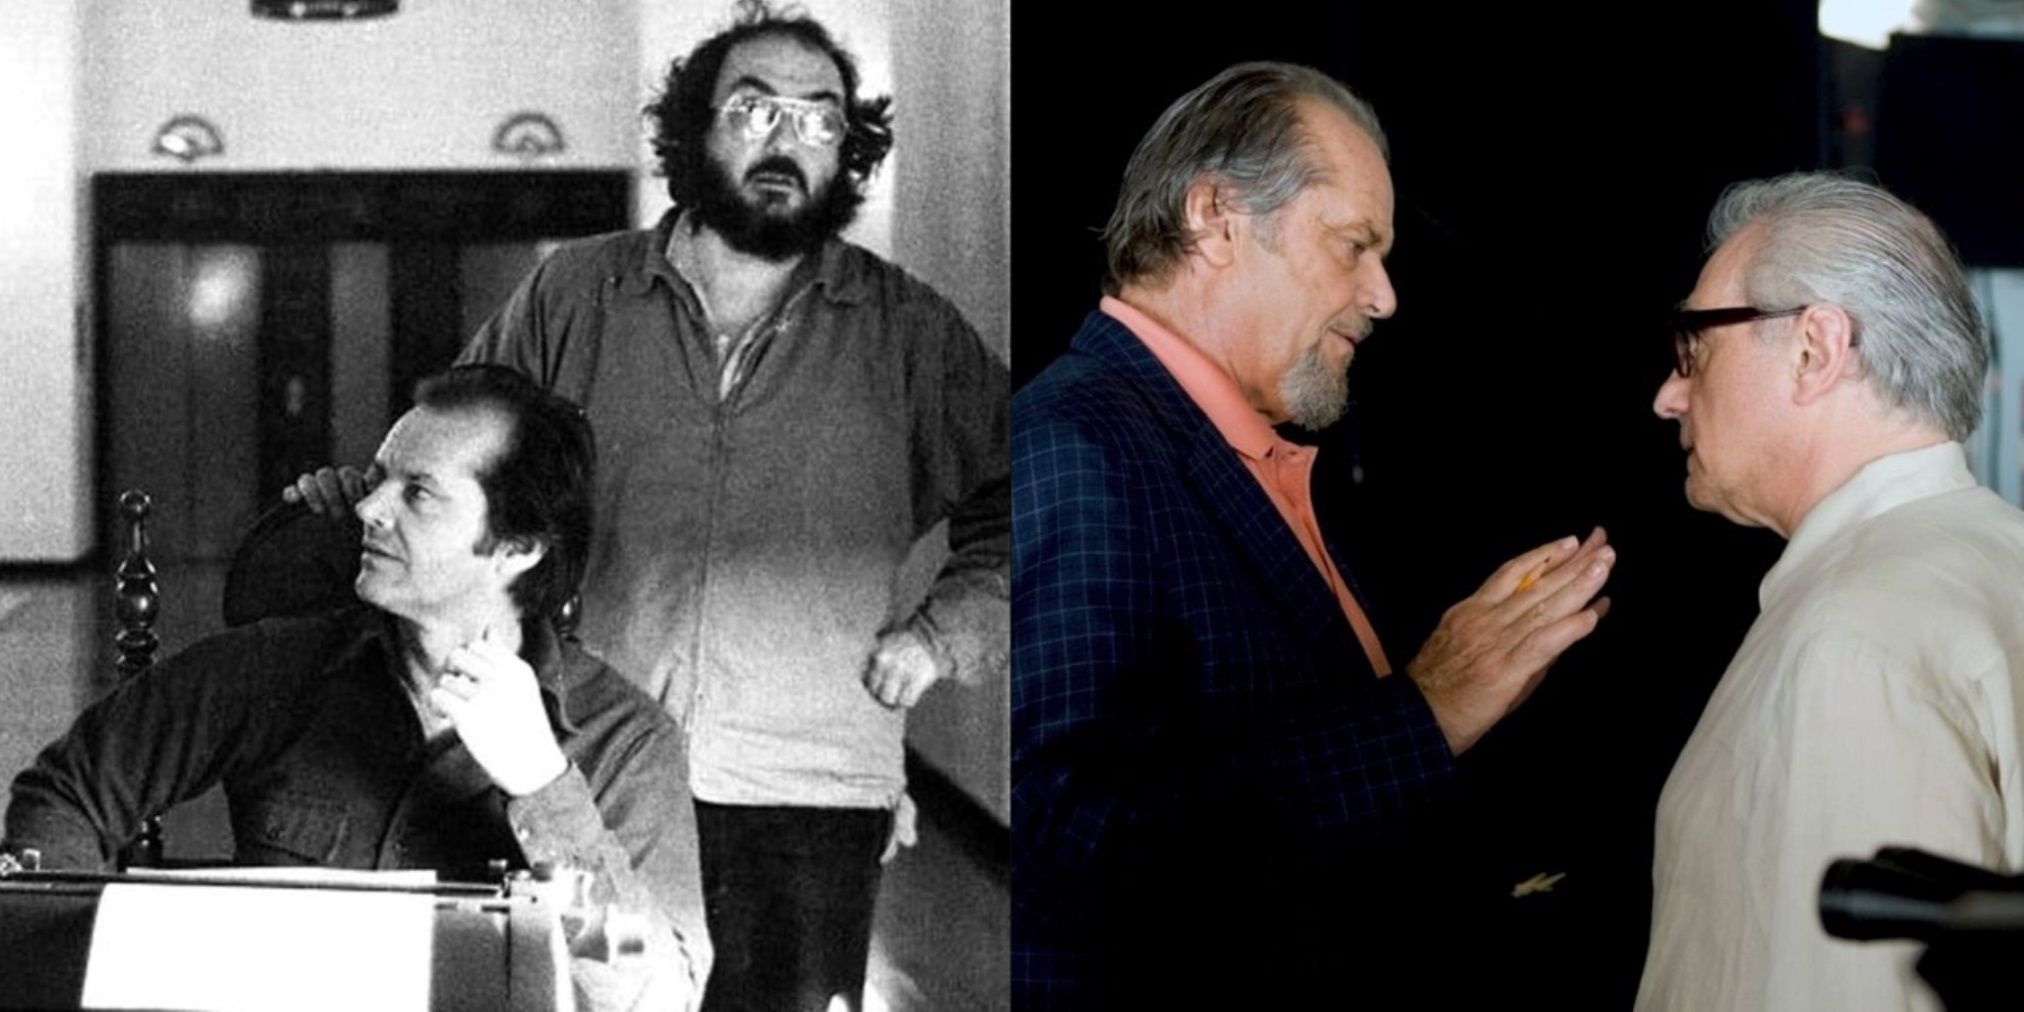 Split image of Jack Nicholson shooting The Shining with Stanley Kubrick and The Departed with Martin Scorsese